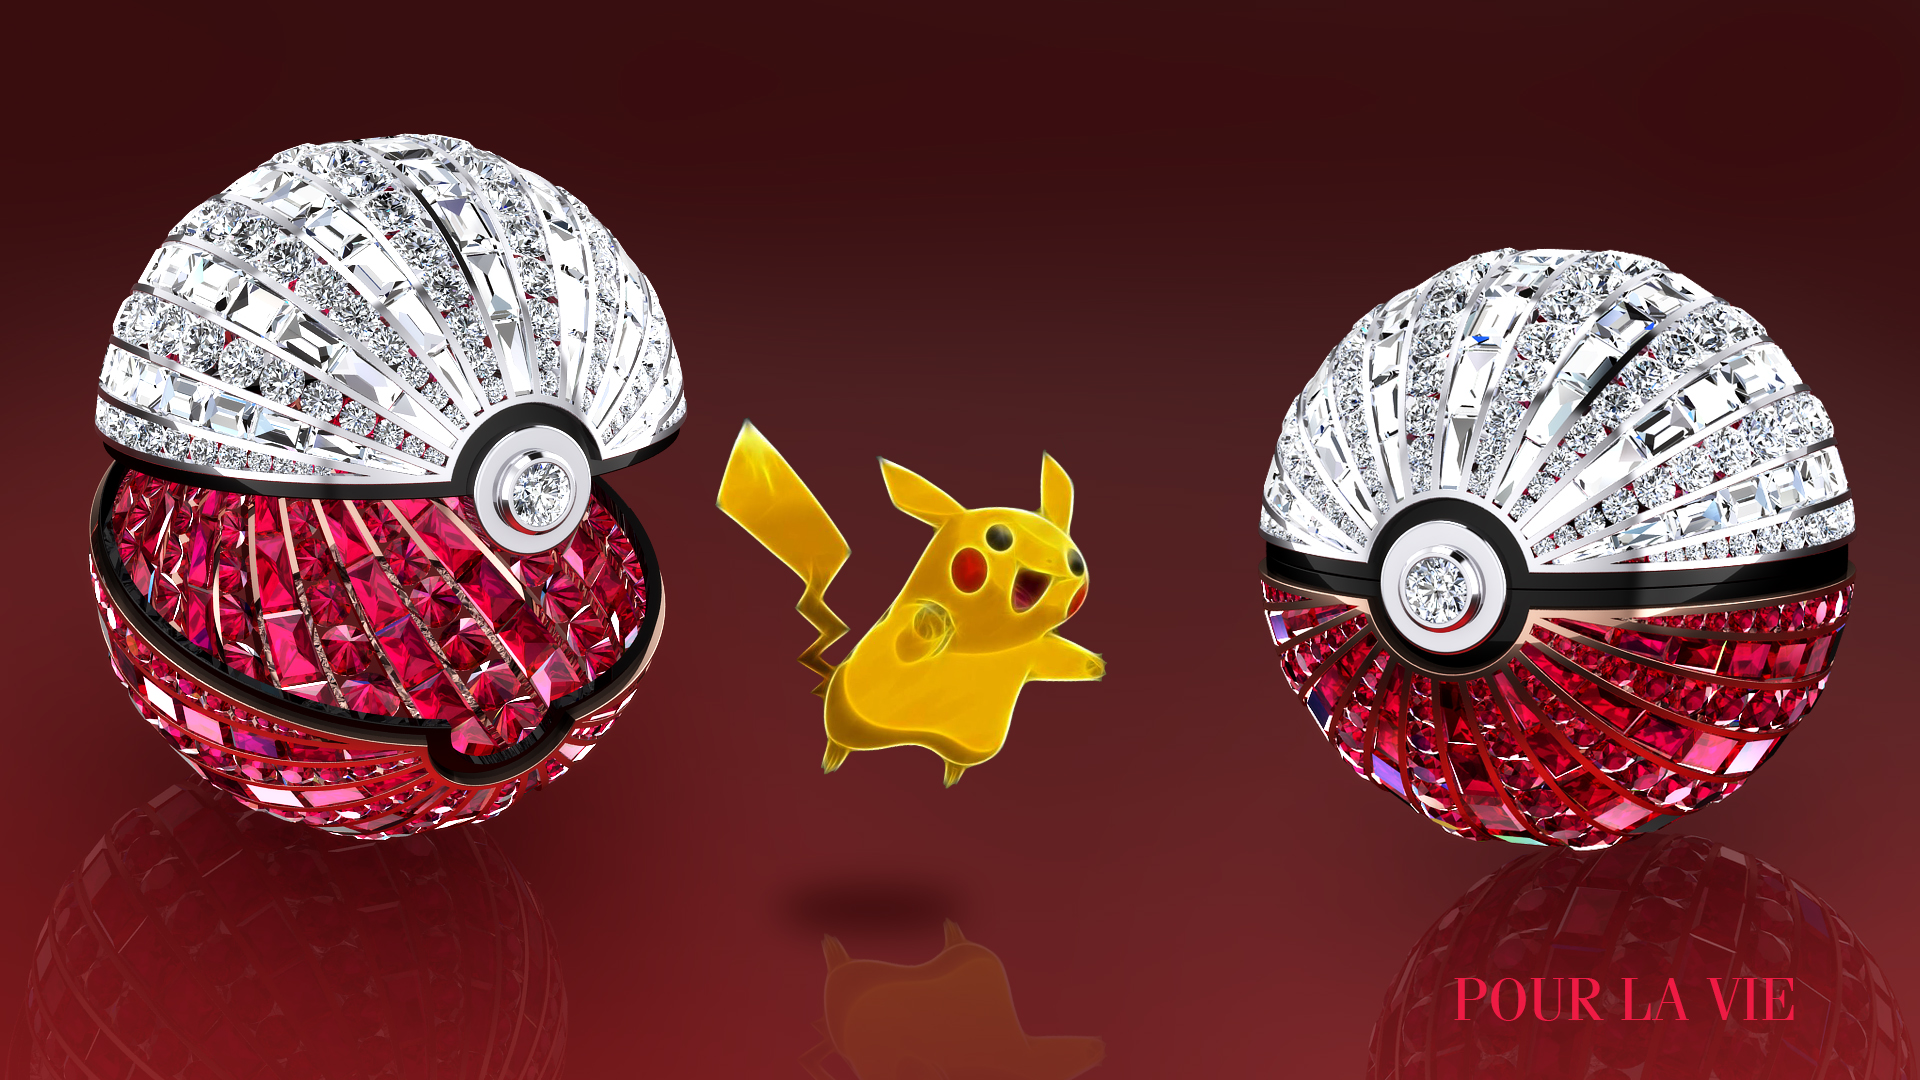 Hong Kong jeweller Pour la Vie has envisioned a Pokeball rendered in diamonds and rubies. 